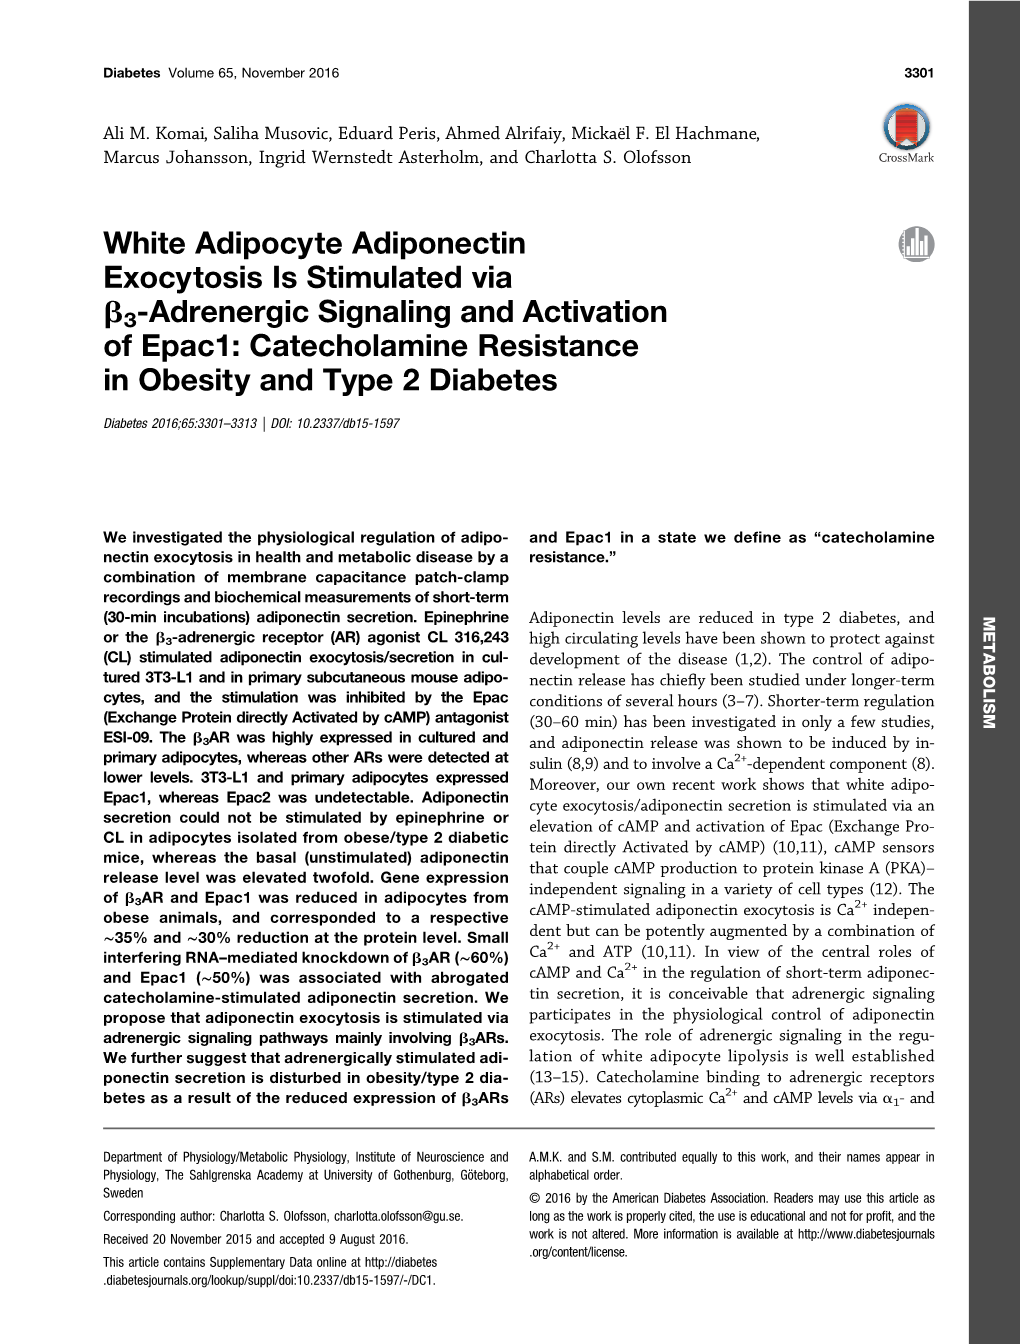 White Adipocyte Adiponectin Exocytosis Is Stimulated Via B3-Adrenergic Signaling and Activation of Epac1: Catecholamine Resistance in Obesity and Type 2 Diabetes